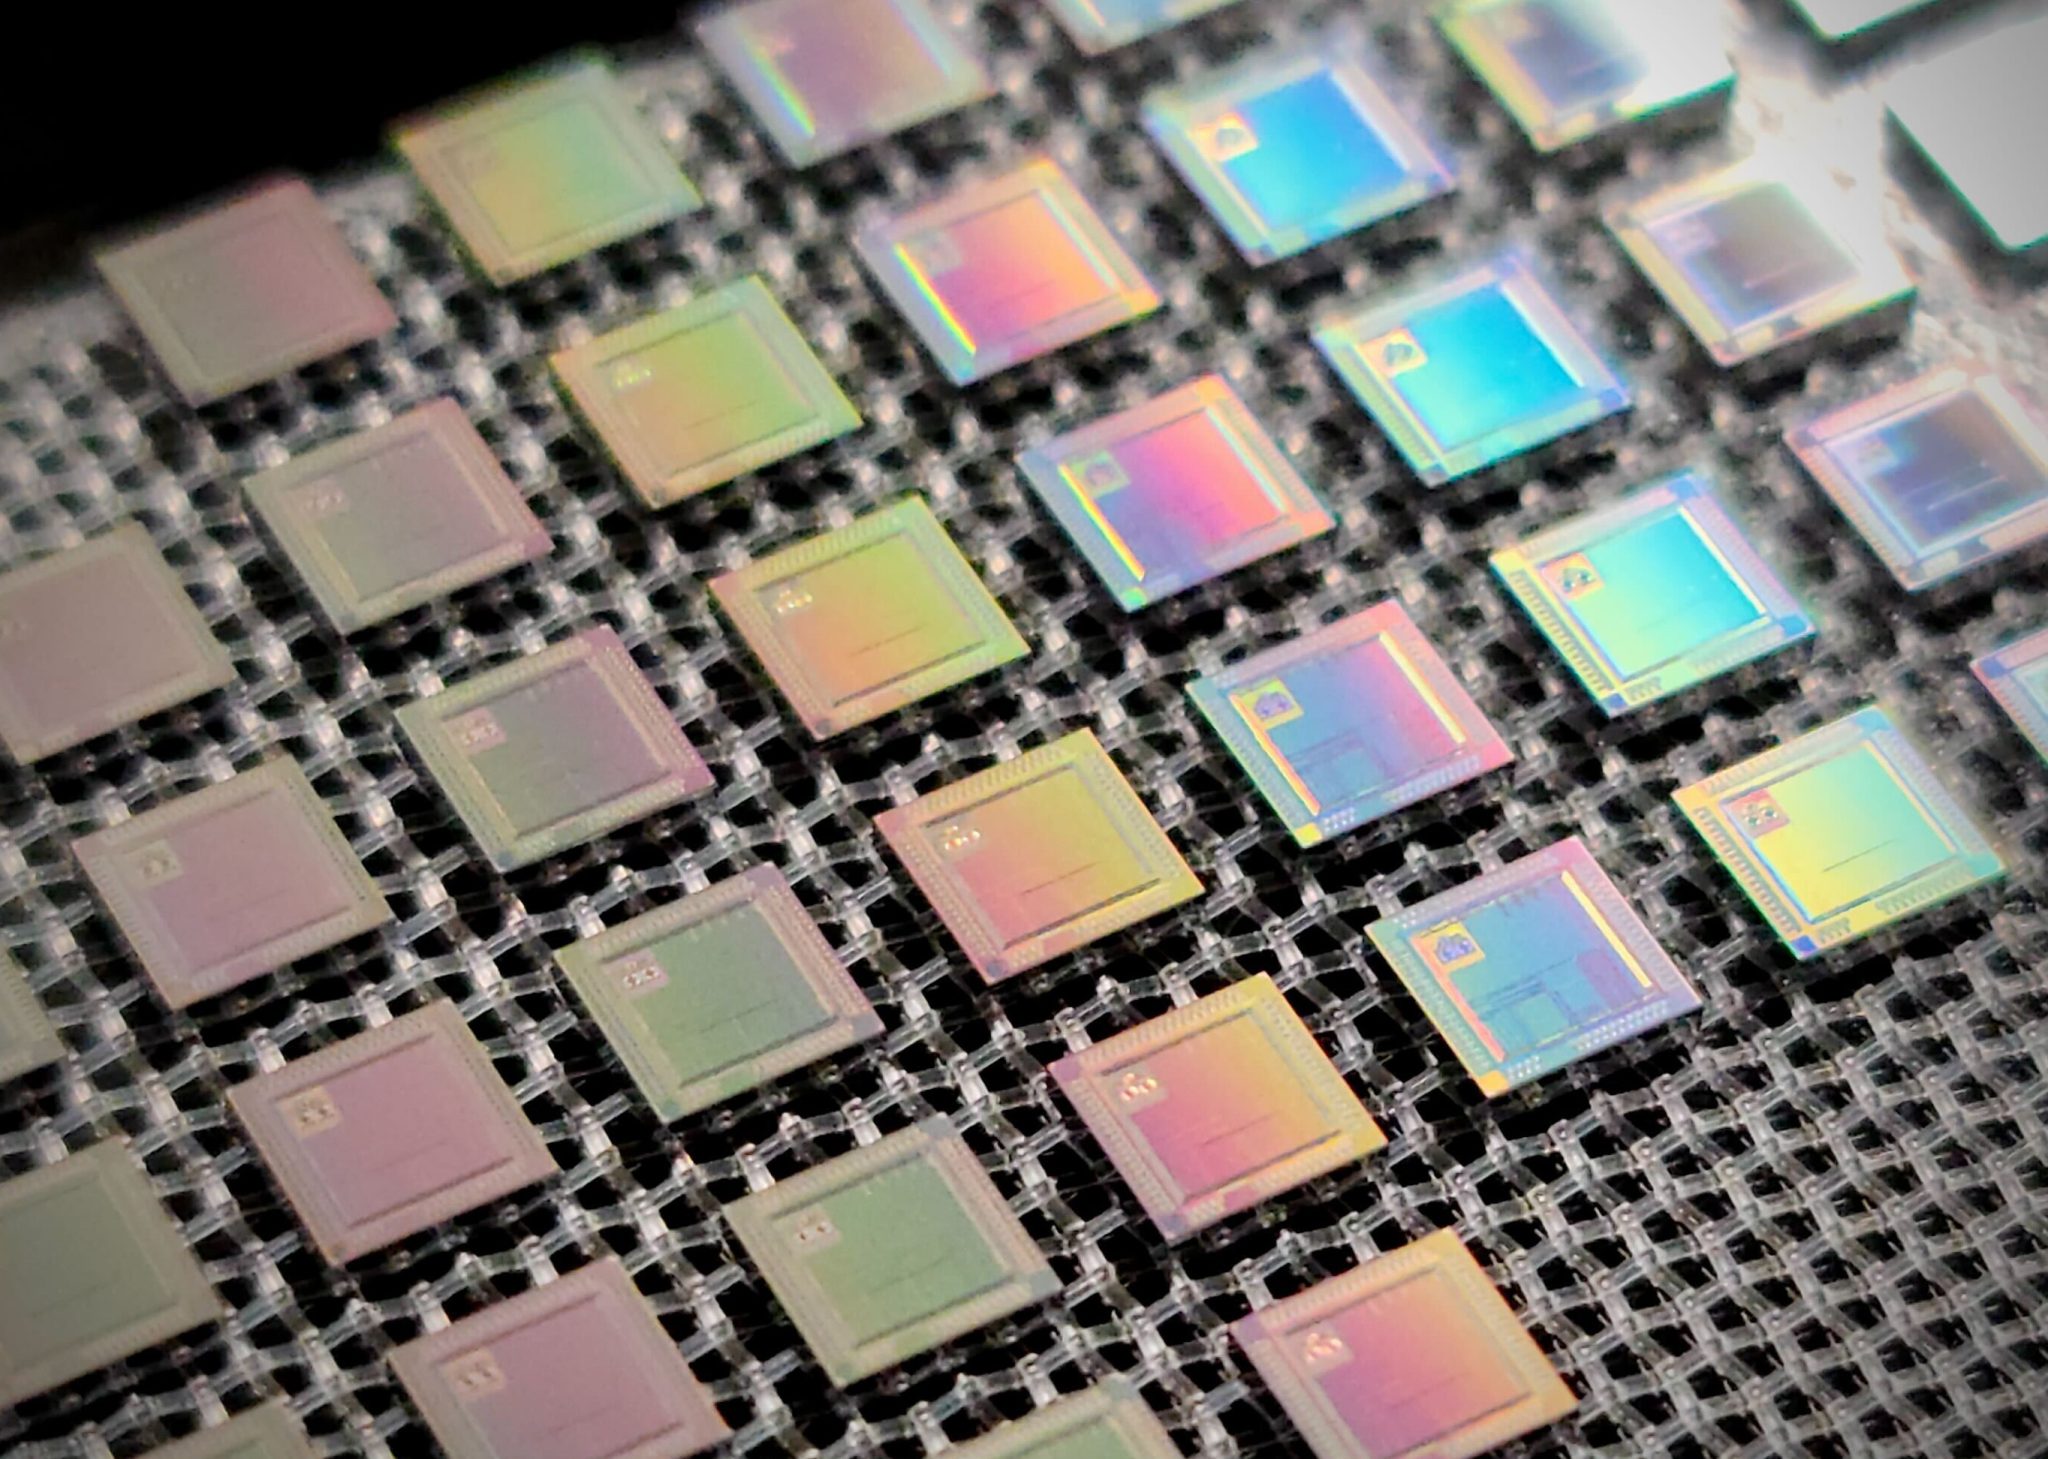 chip goes into mass production